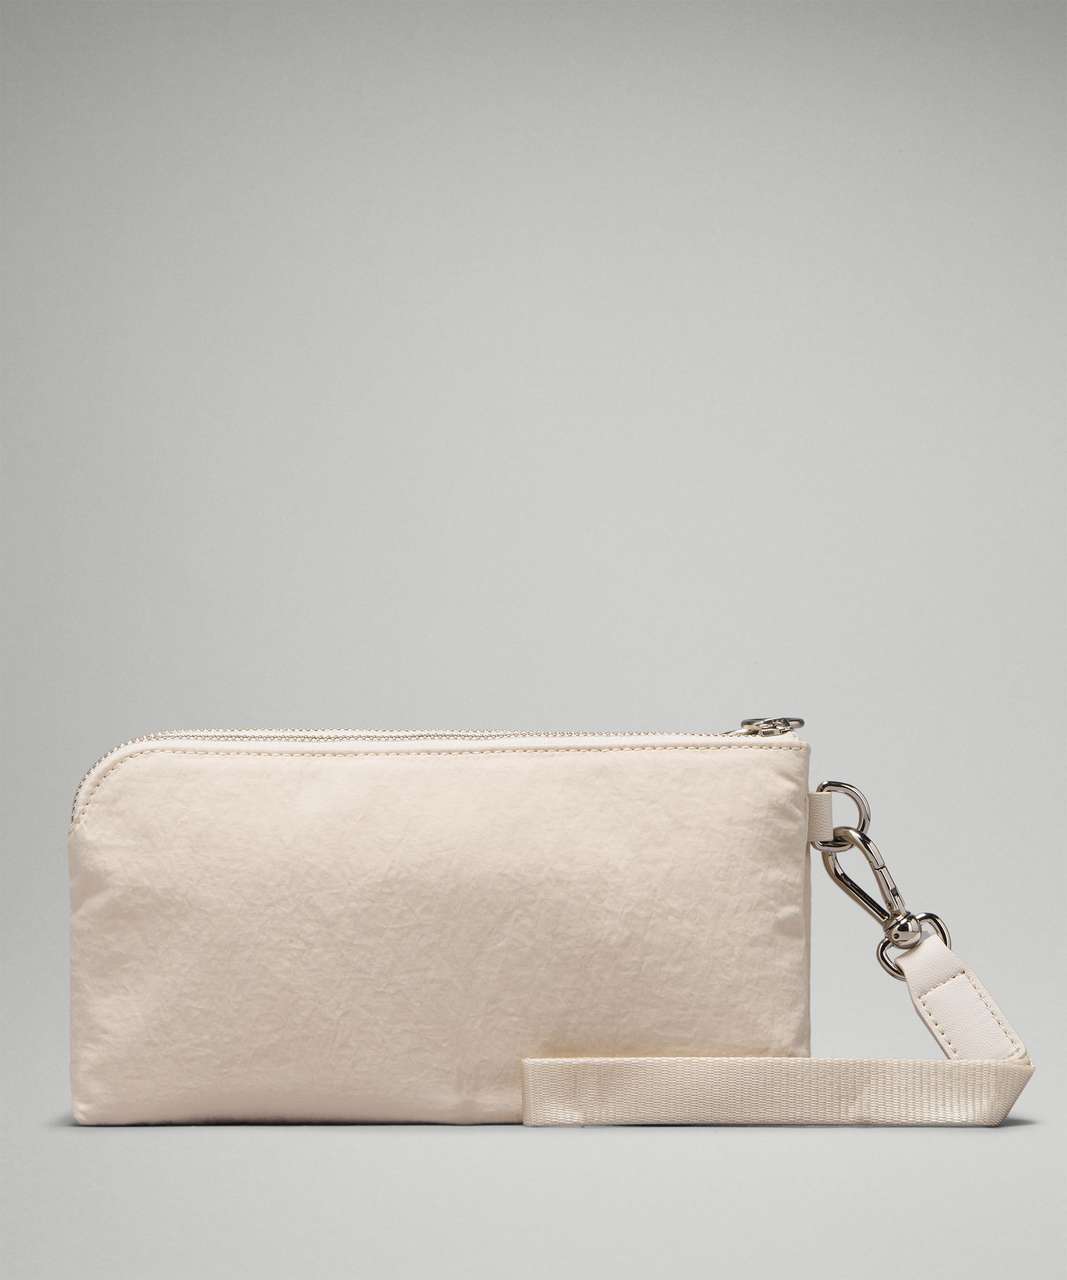 Lululemon Curved Wristlet - White Opal (First Release)